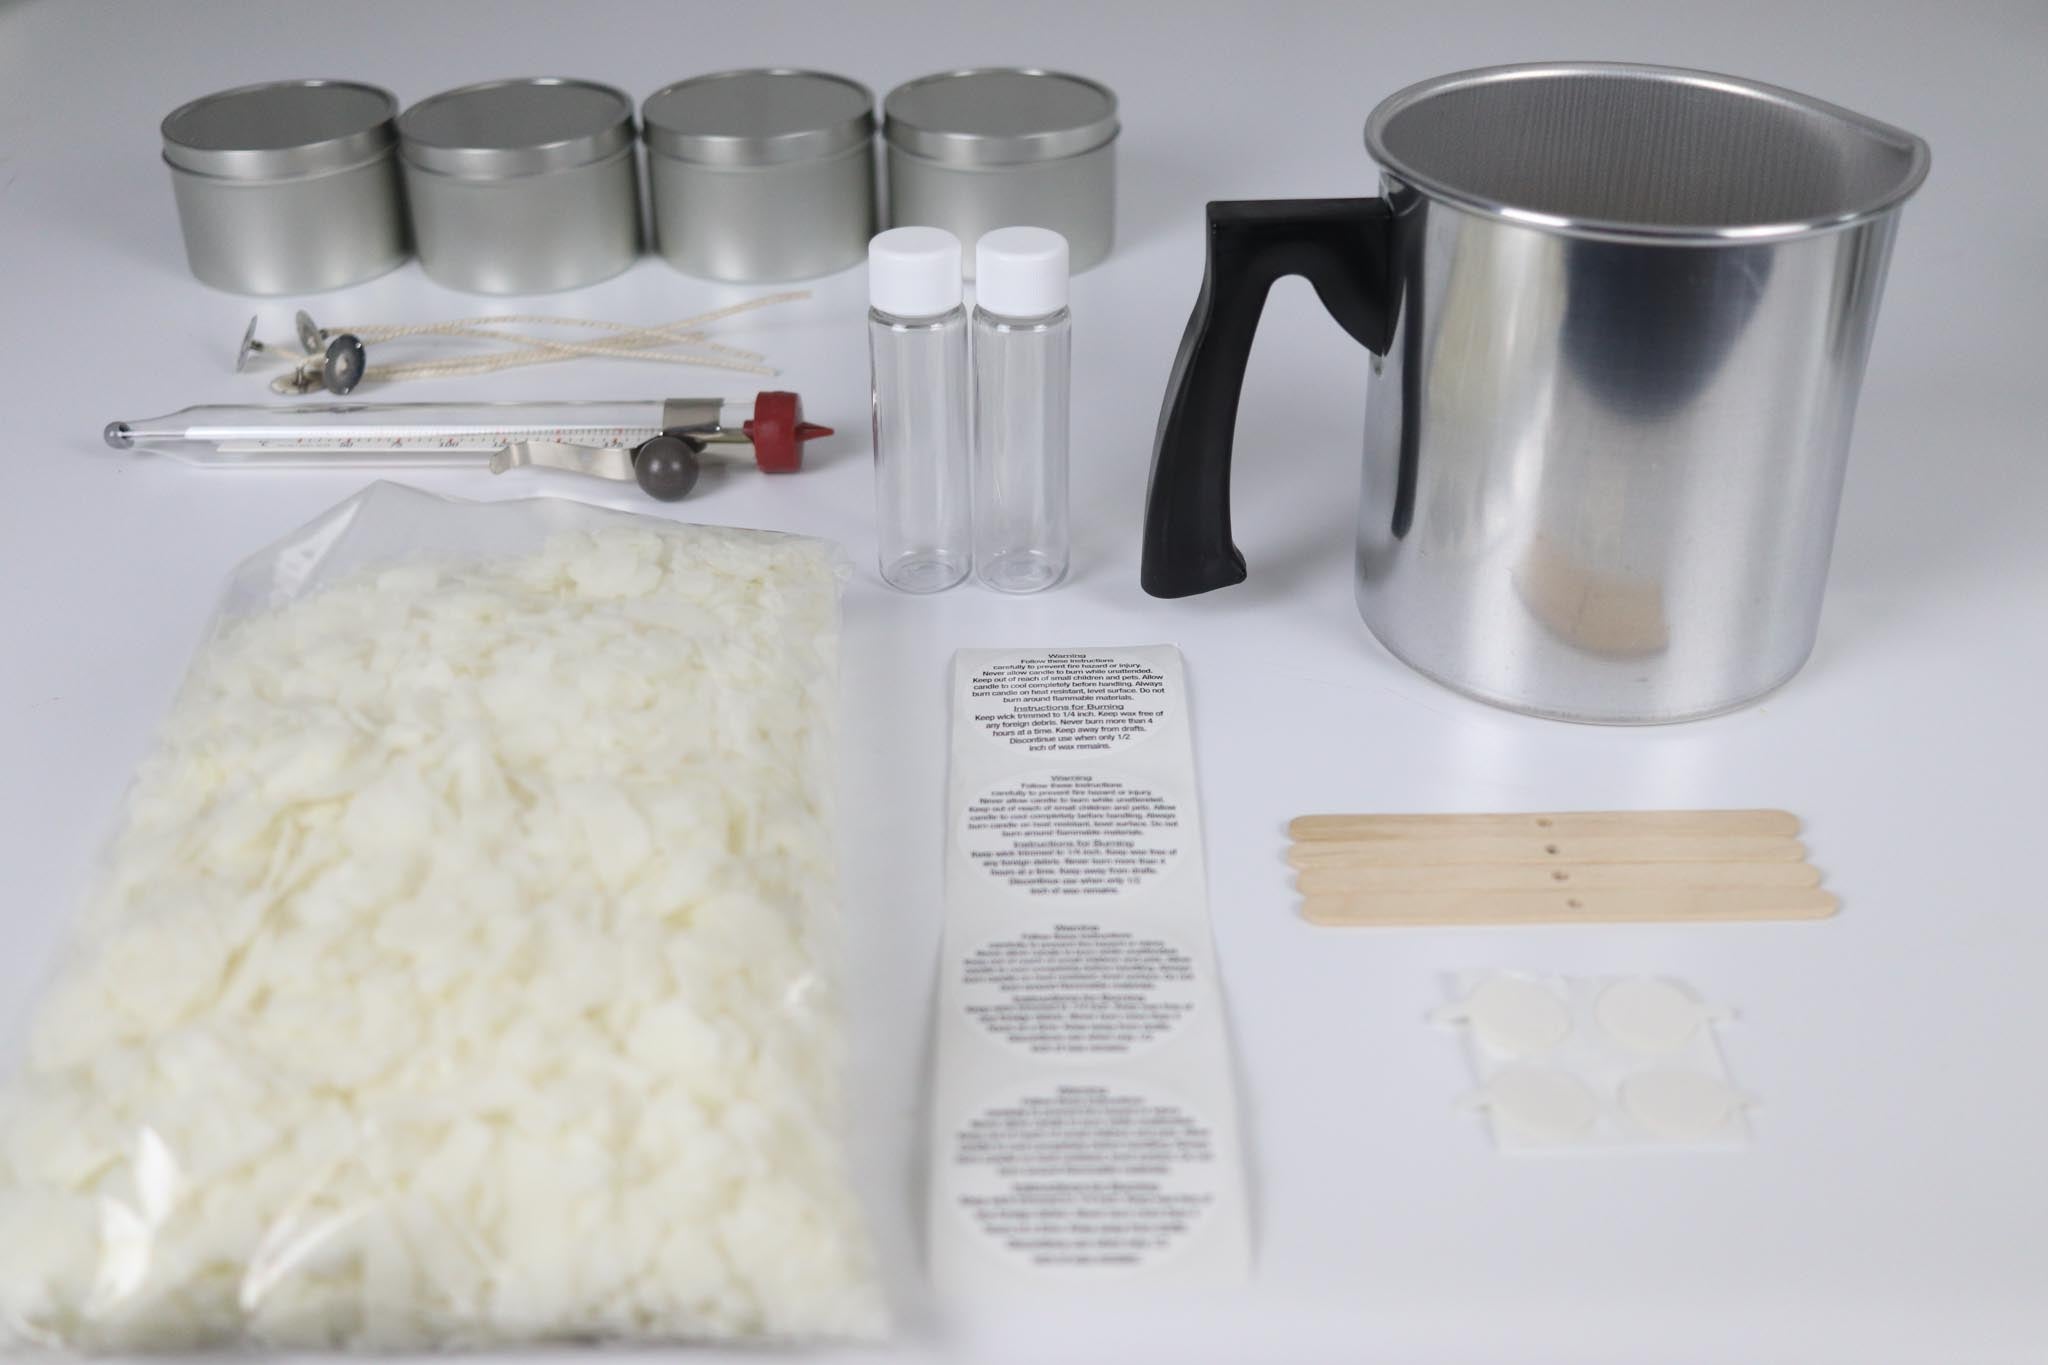 What's the full material for 1 candle making kit? 